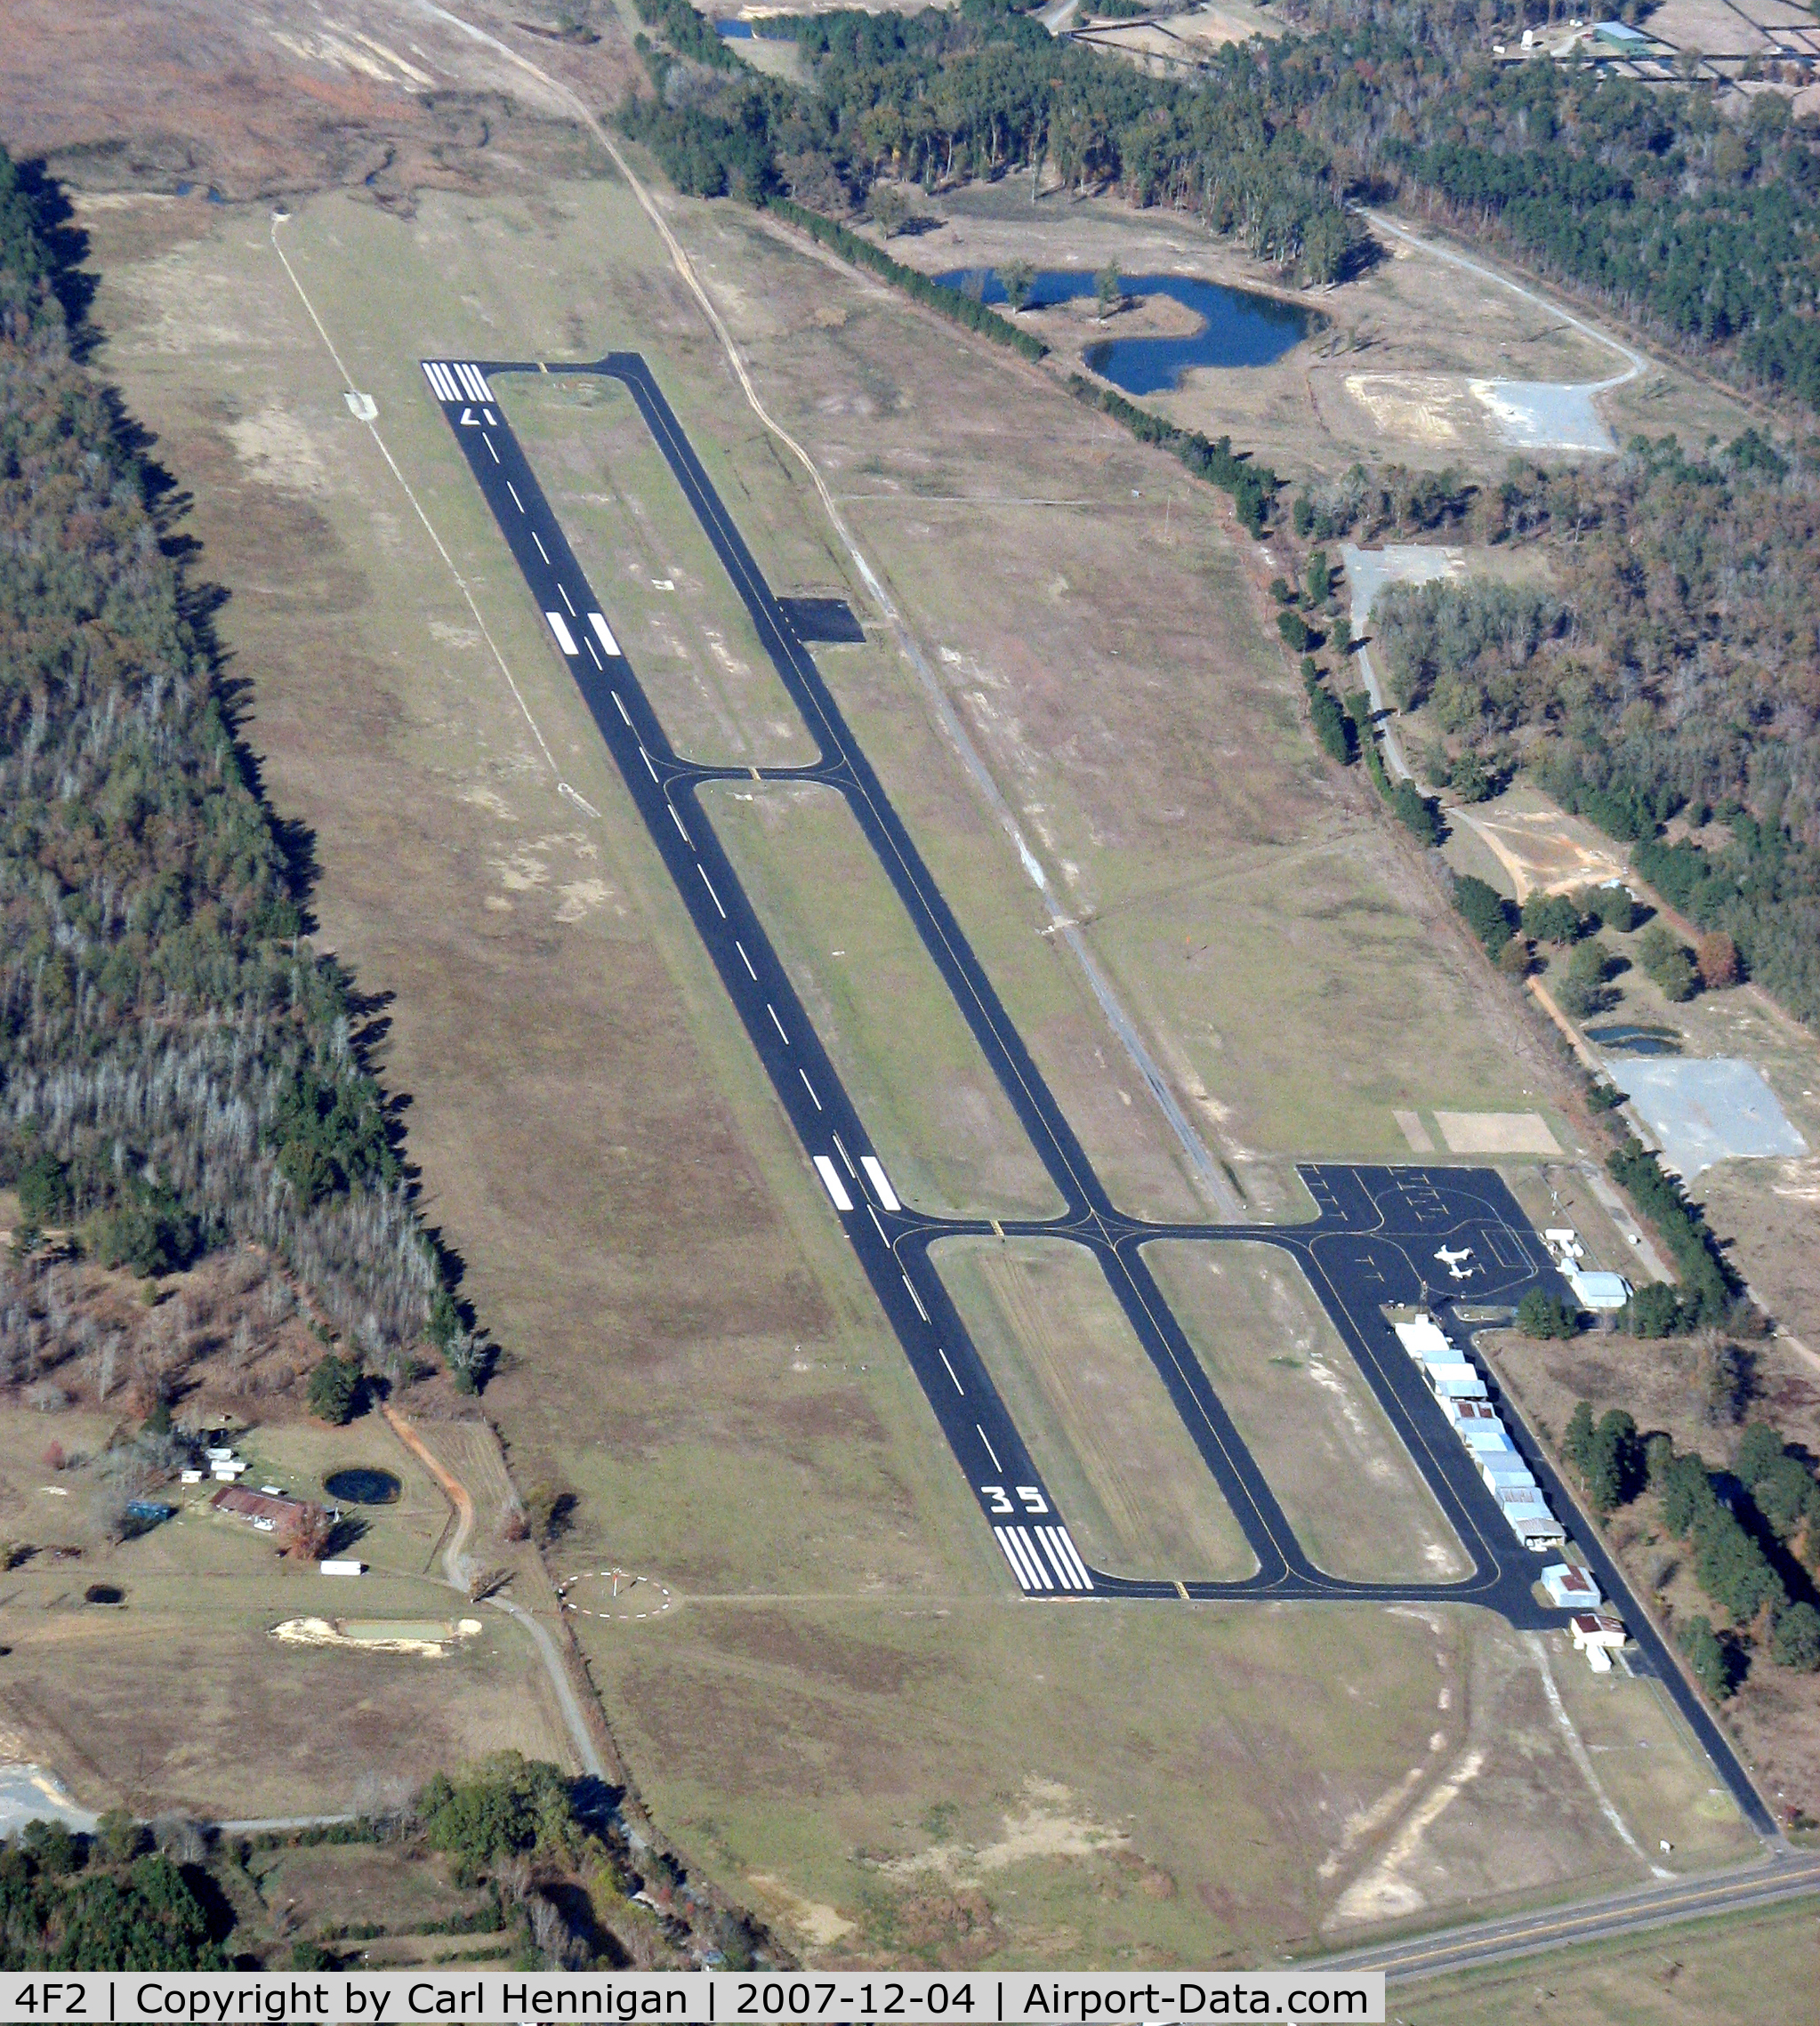 Panola County-sharpe Field Airport (4F2) - Looking north